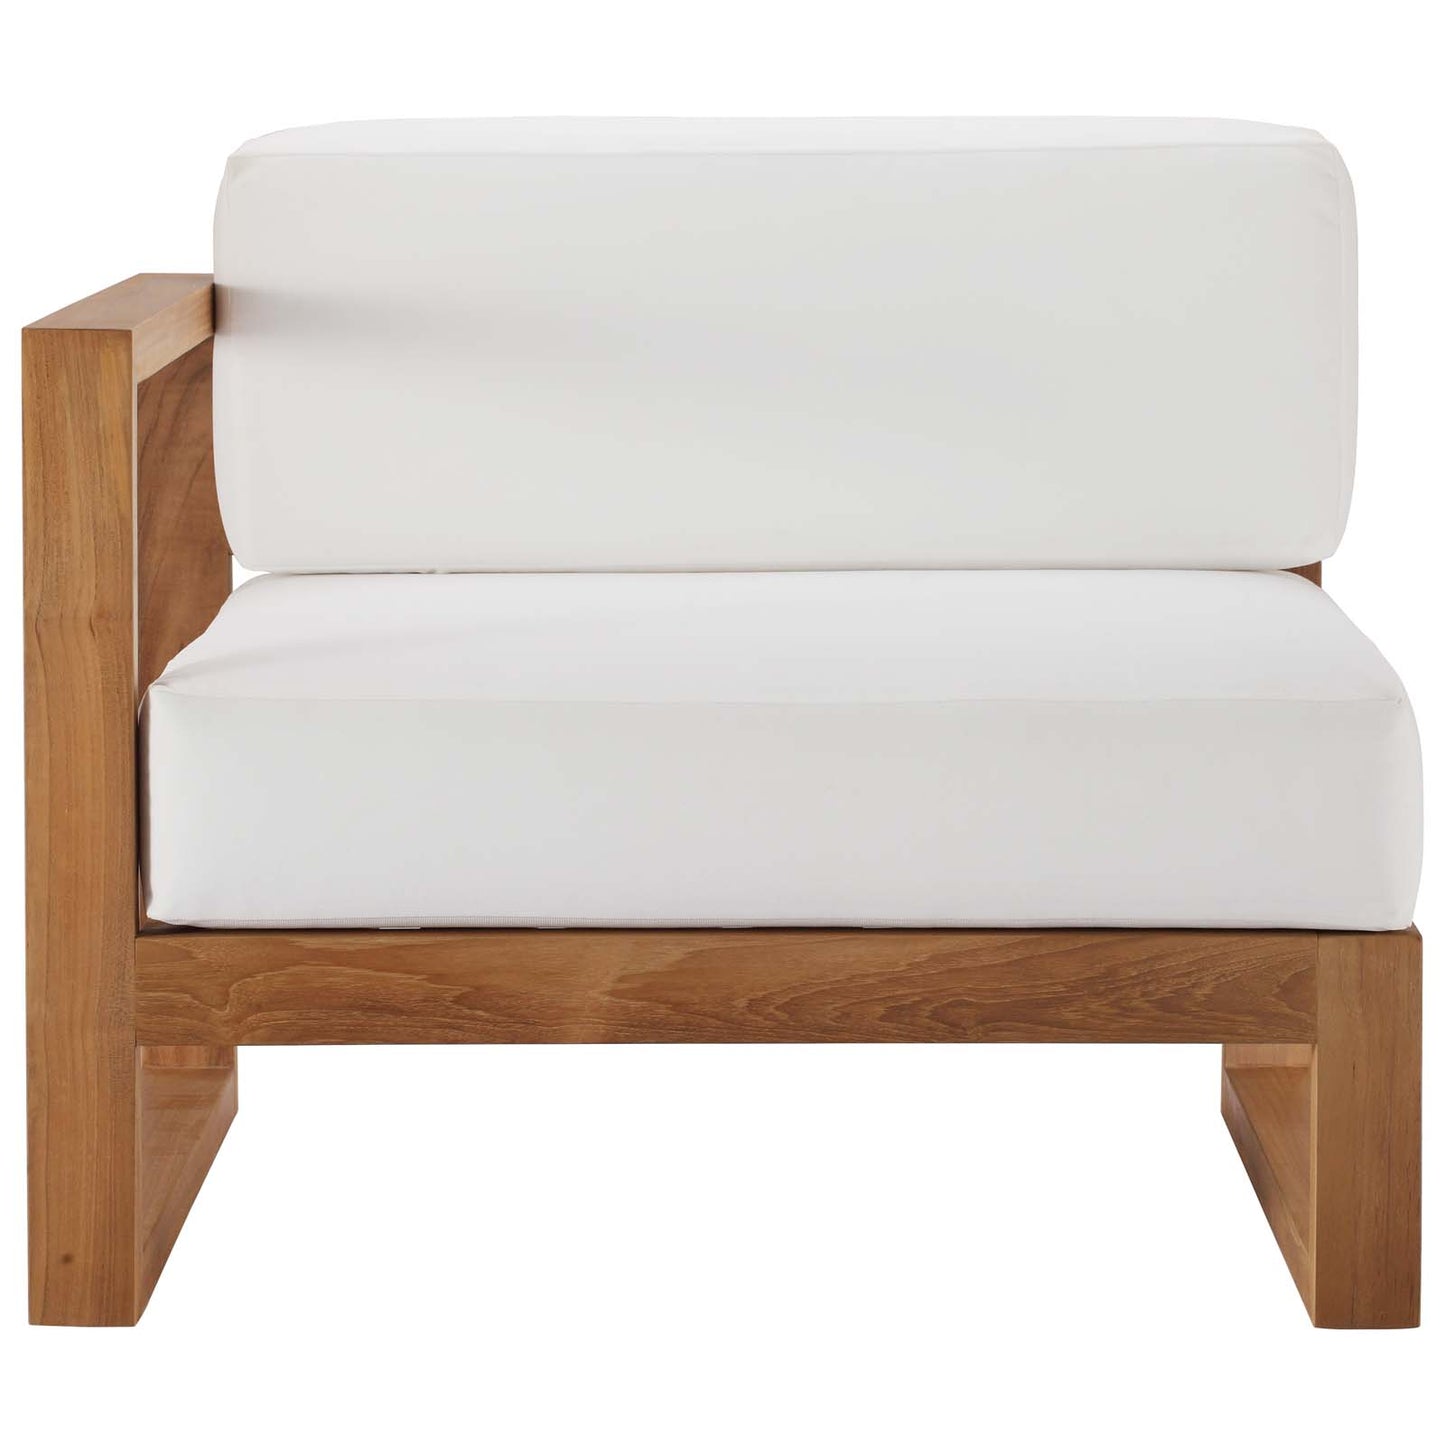 Upland Outdoor Patio Teak Wood Left-Arm Chair Natural White EEI-4124-NAT-WHI